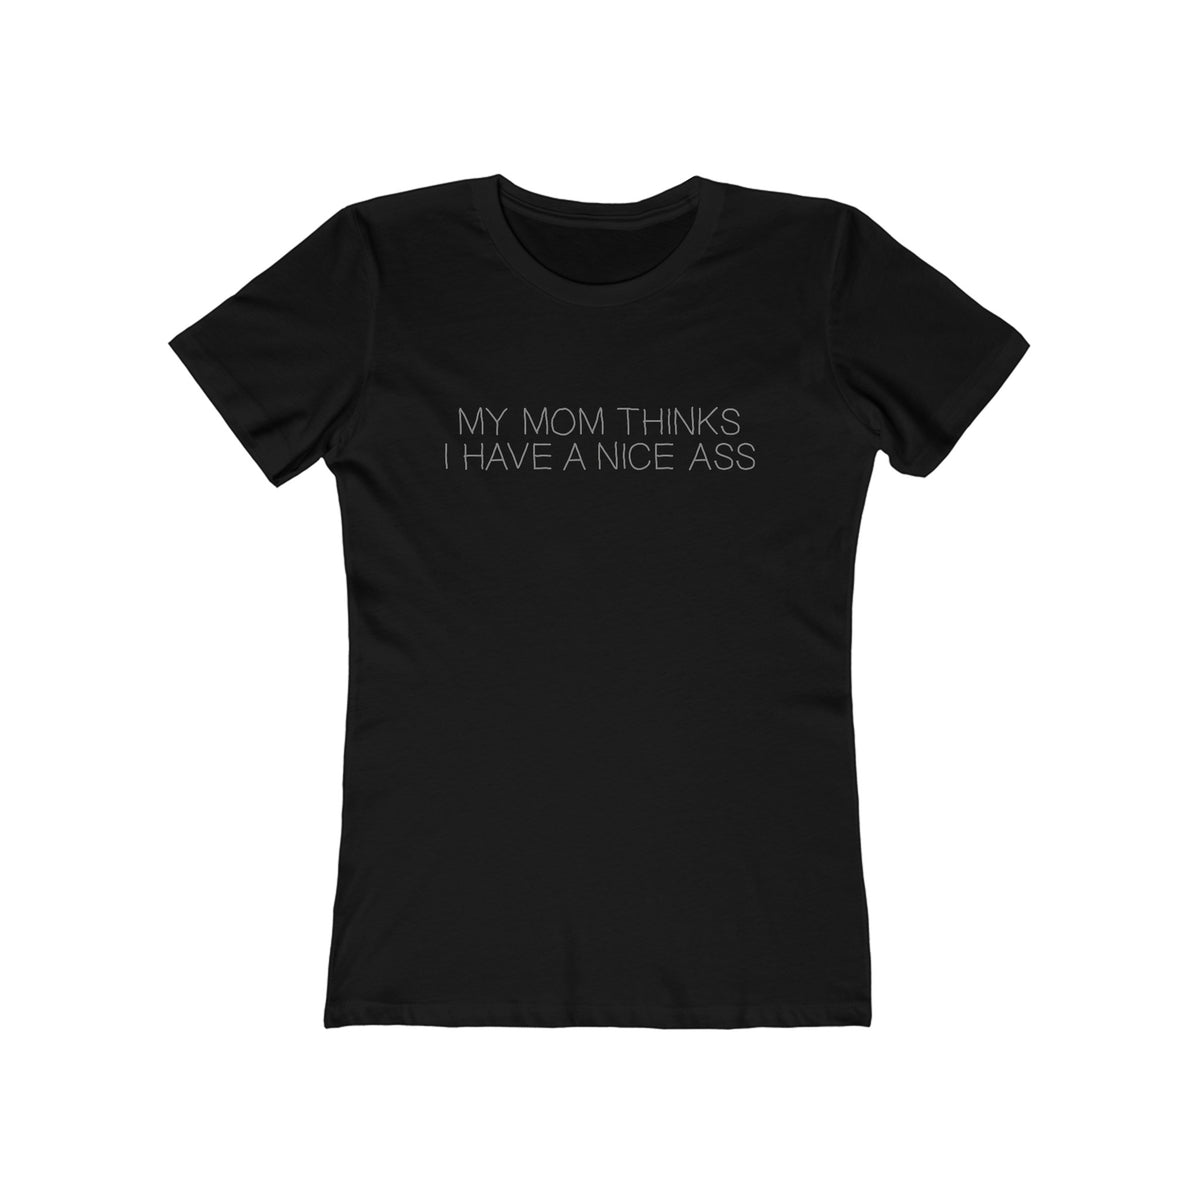 My Mom Thinks I Have A Nice Ass - Women’s T-Shirt